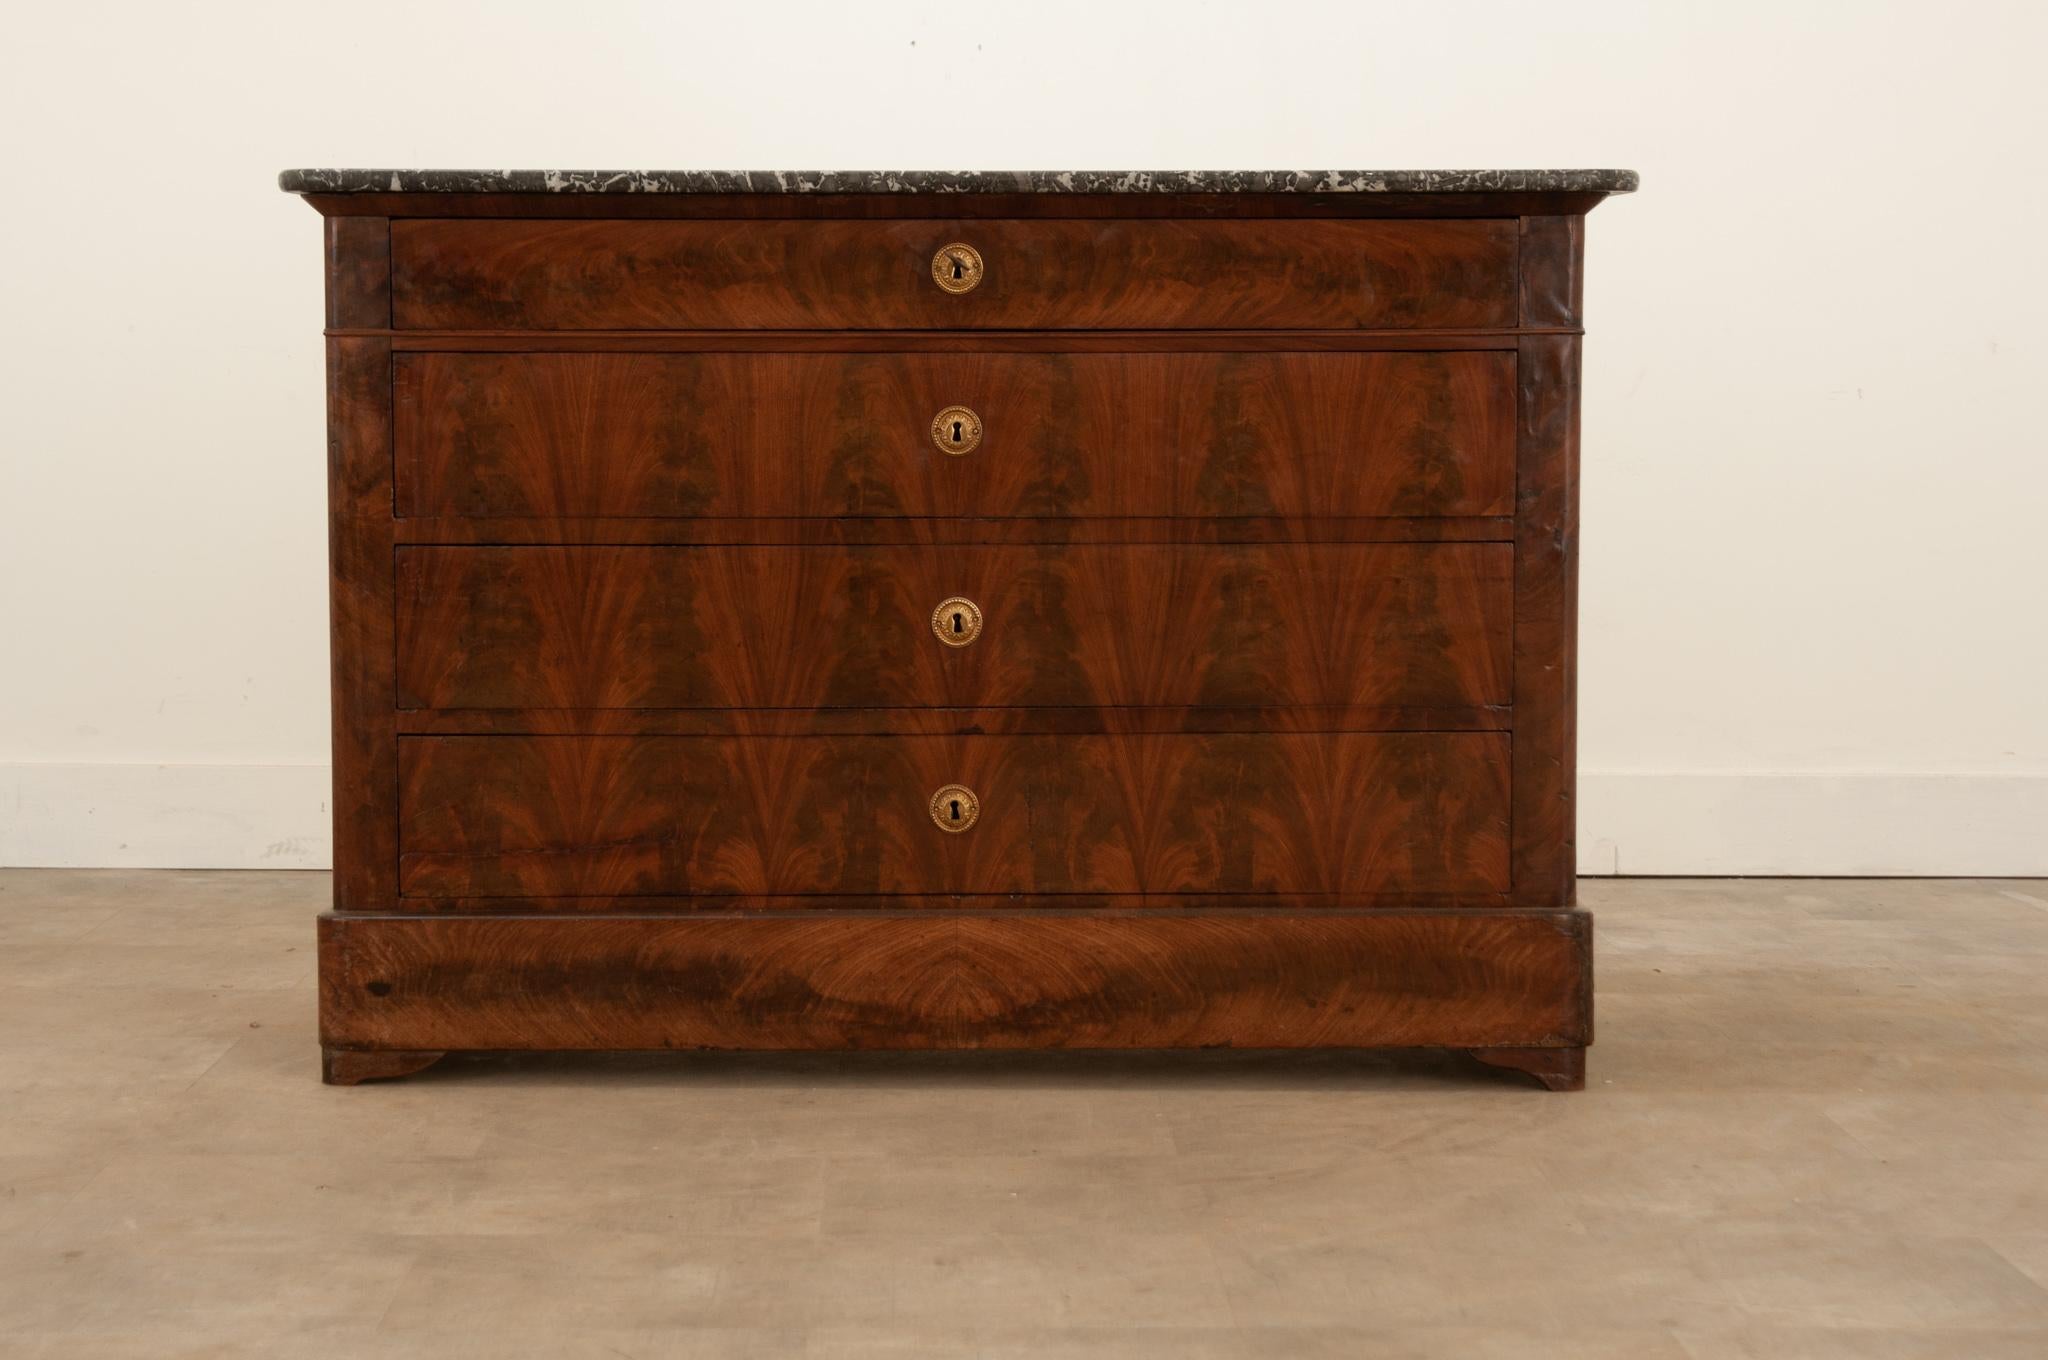 Beautifully book-matched mahogany veneer finishes this spectacular Louis Philippe style commode from 19th Century France. Numerous fossil inclusions can be found throughout the commode’s original gray marble top. The antique consists of four drawers